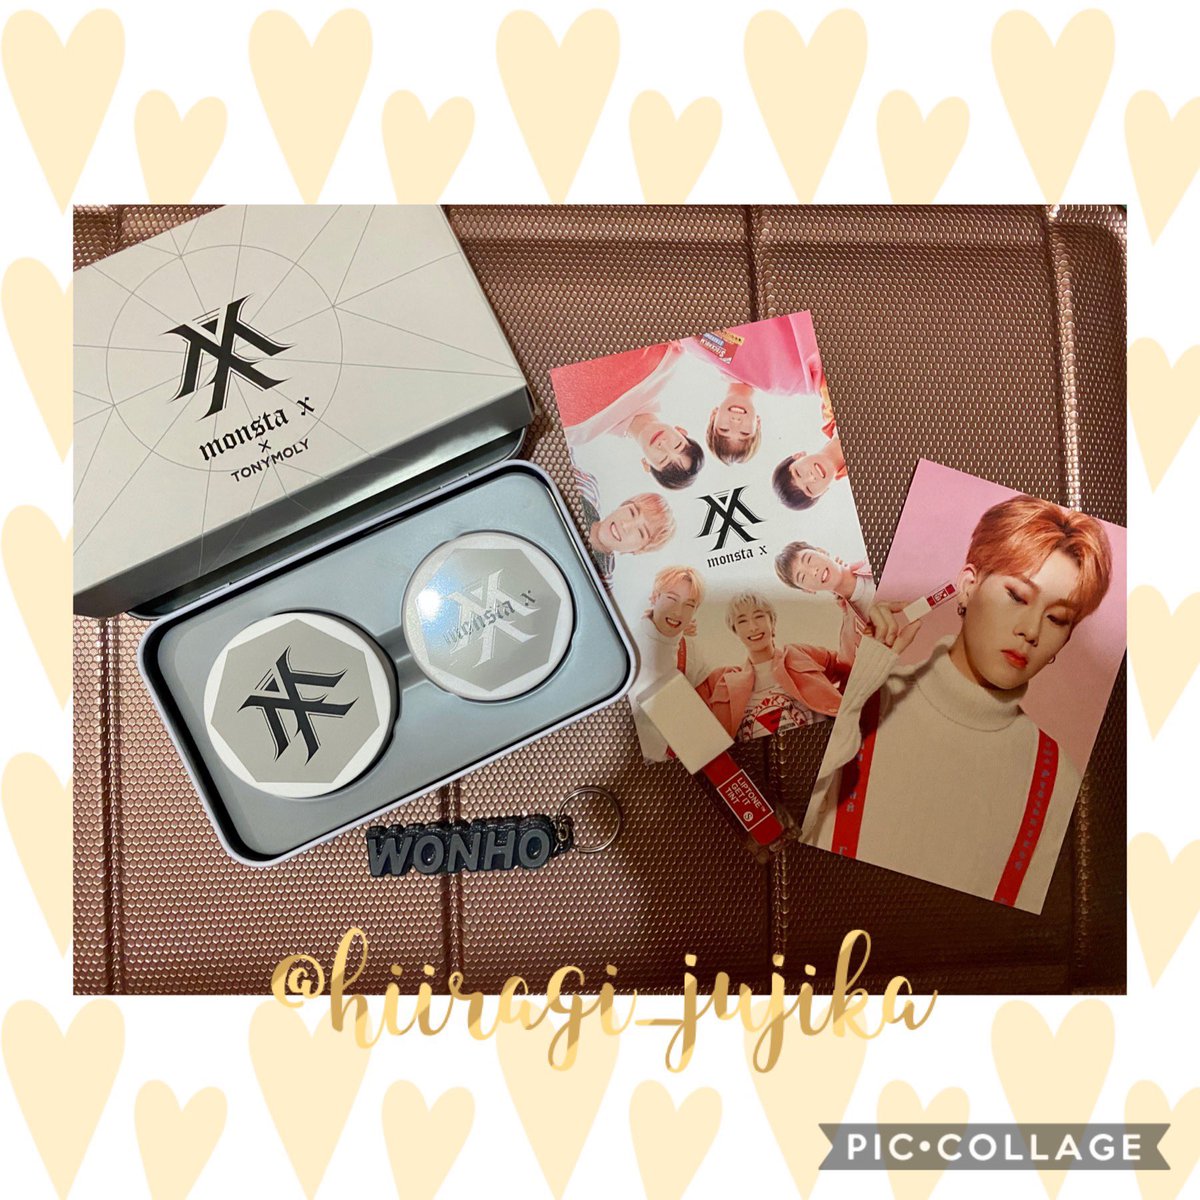 Prize #7: (BG—2600 MBBs only so no shipping)1 Winner of Tony Moly powder set + tony moly liptint + Jooheon and OT7 tony moly photocard*like/rt*do any of the above and reply with proofs* ends TBA